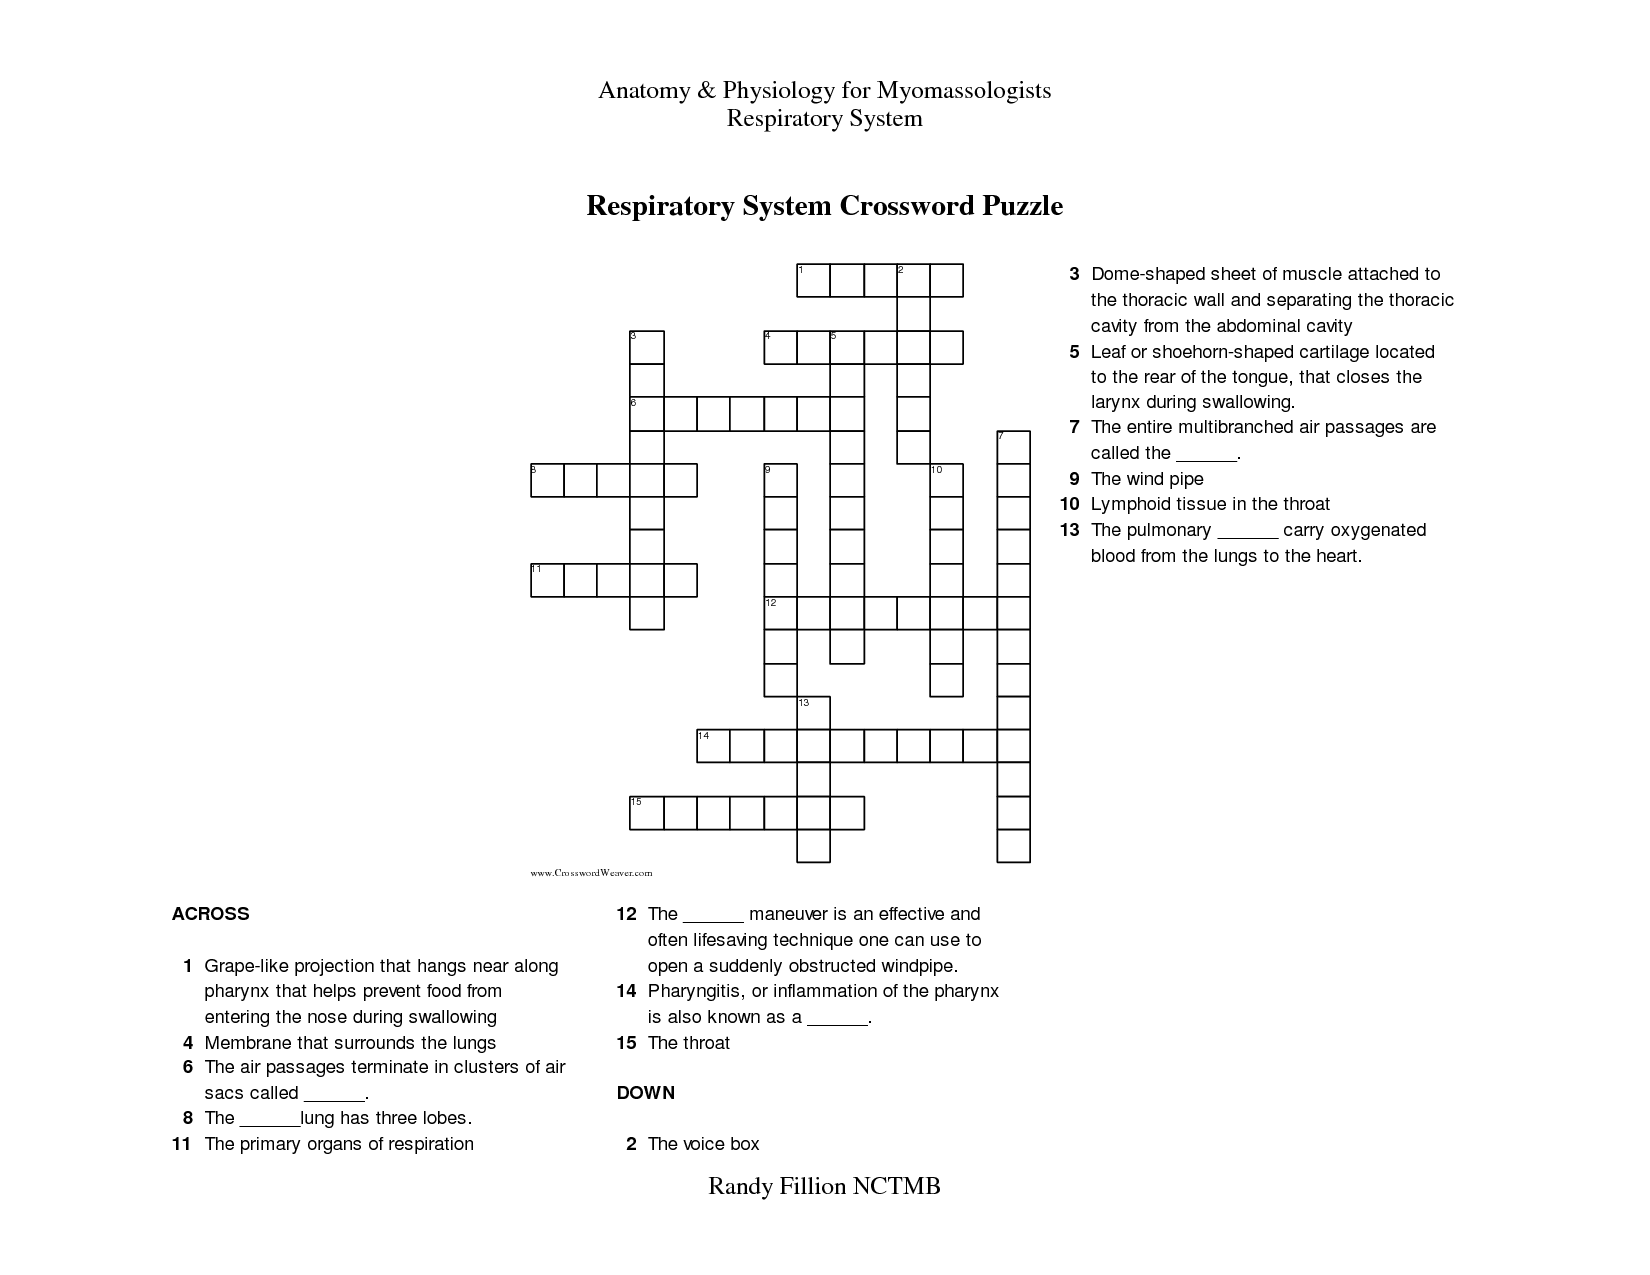 Respiratory System Crossword Puzzle Answer Image